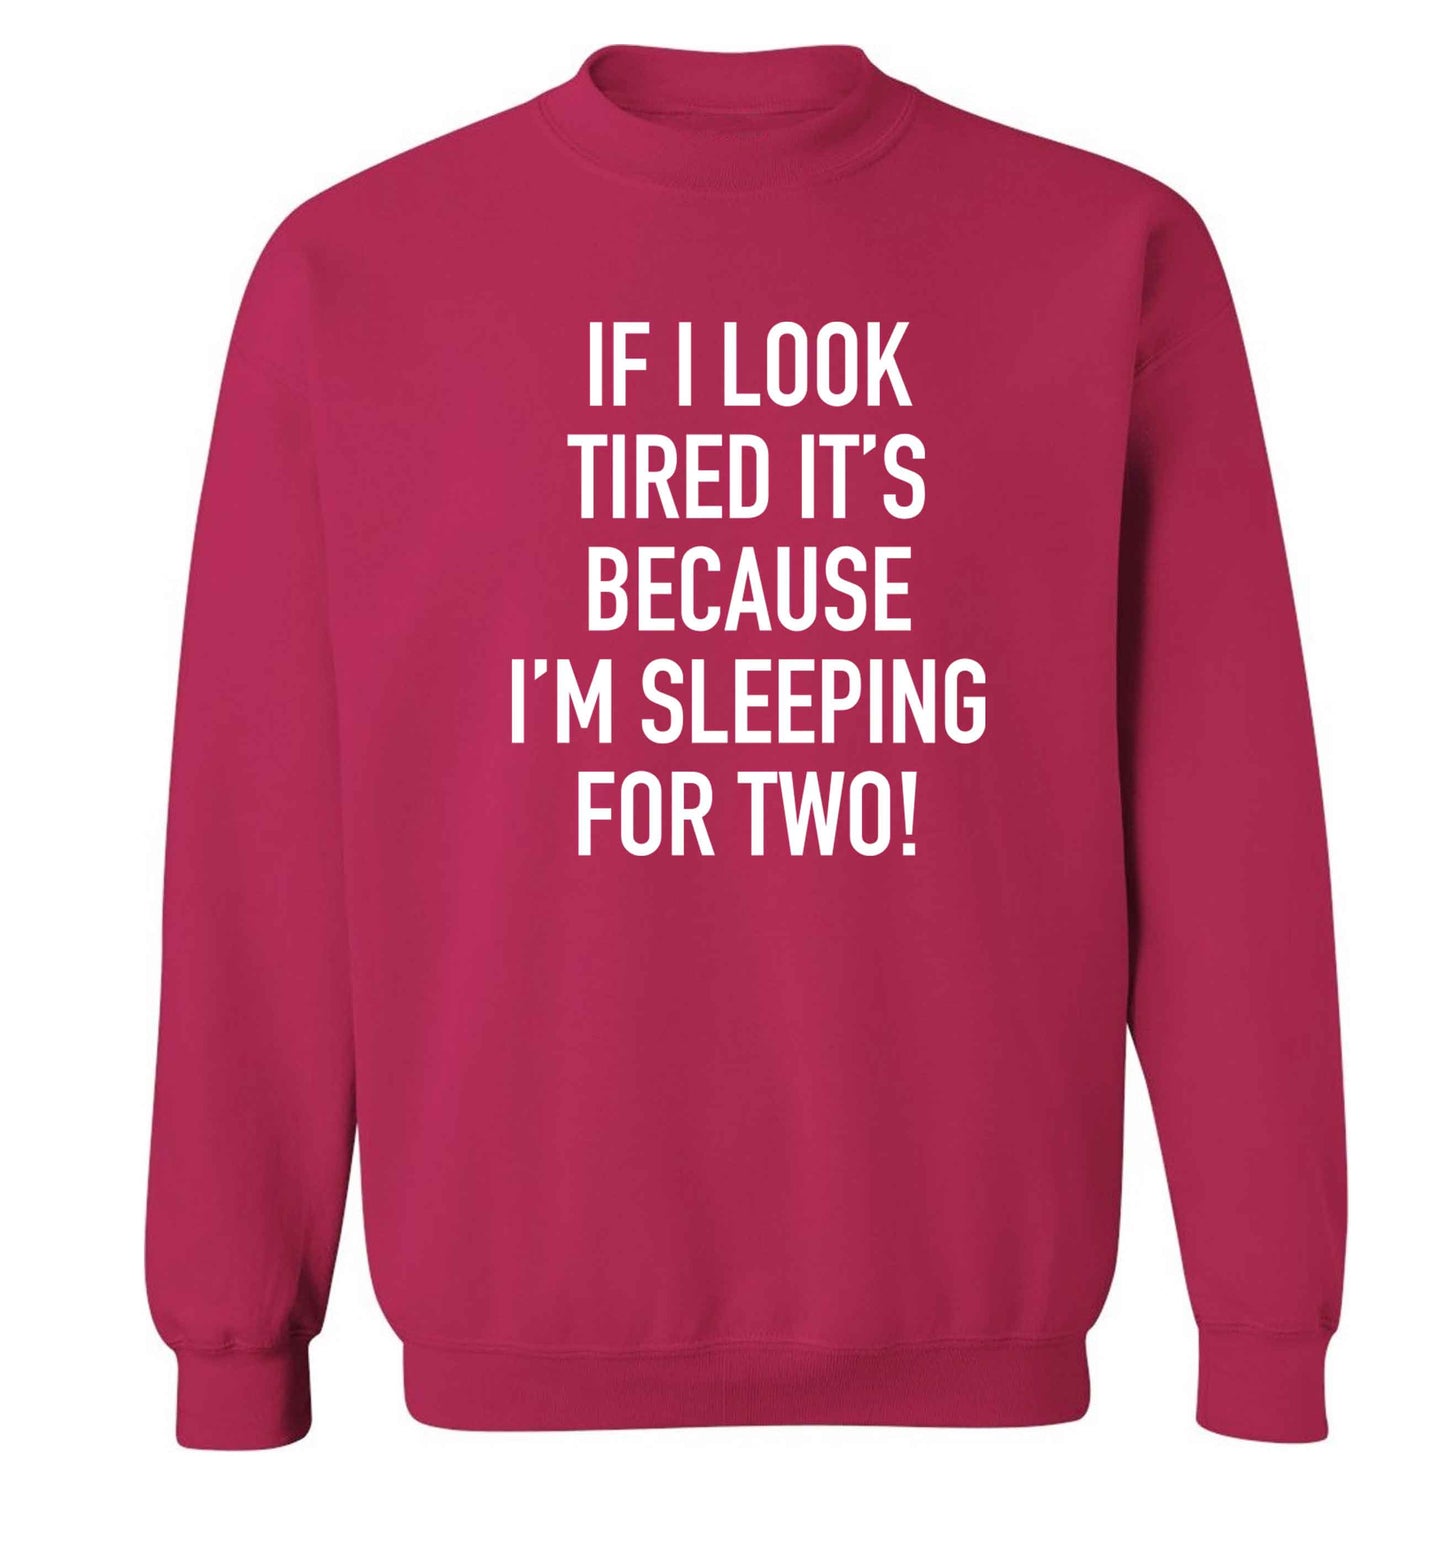 If I look tired it's because I'm sleeping for two Adult's unisex pink Sweater 2XL